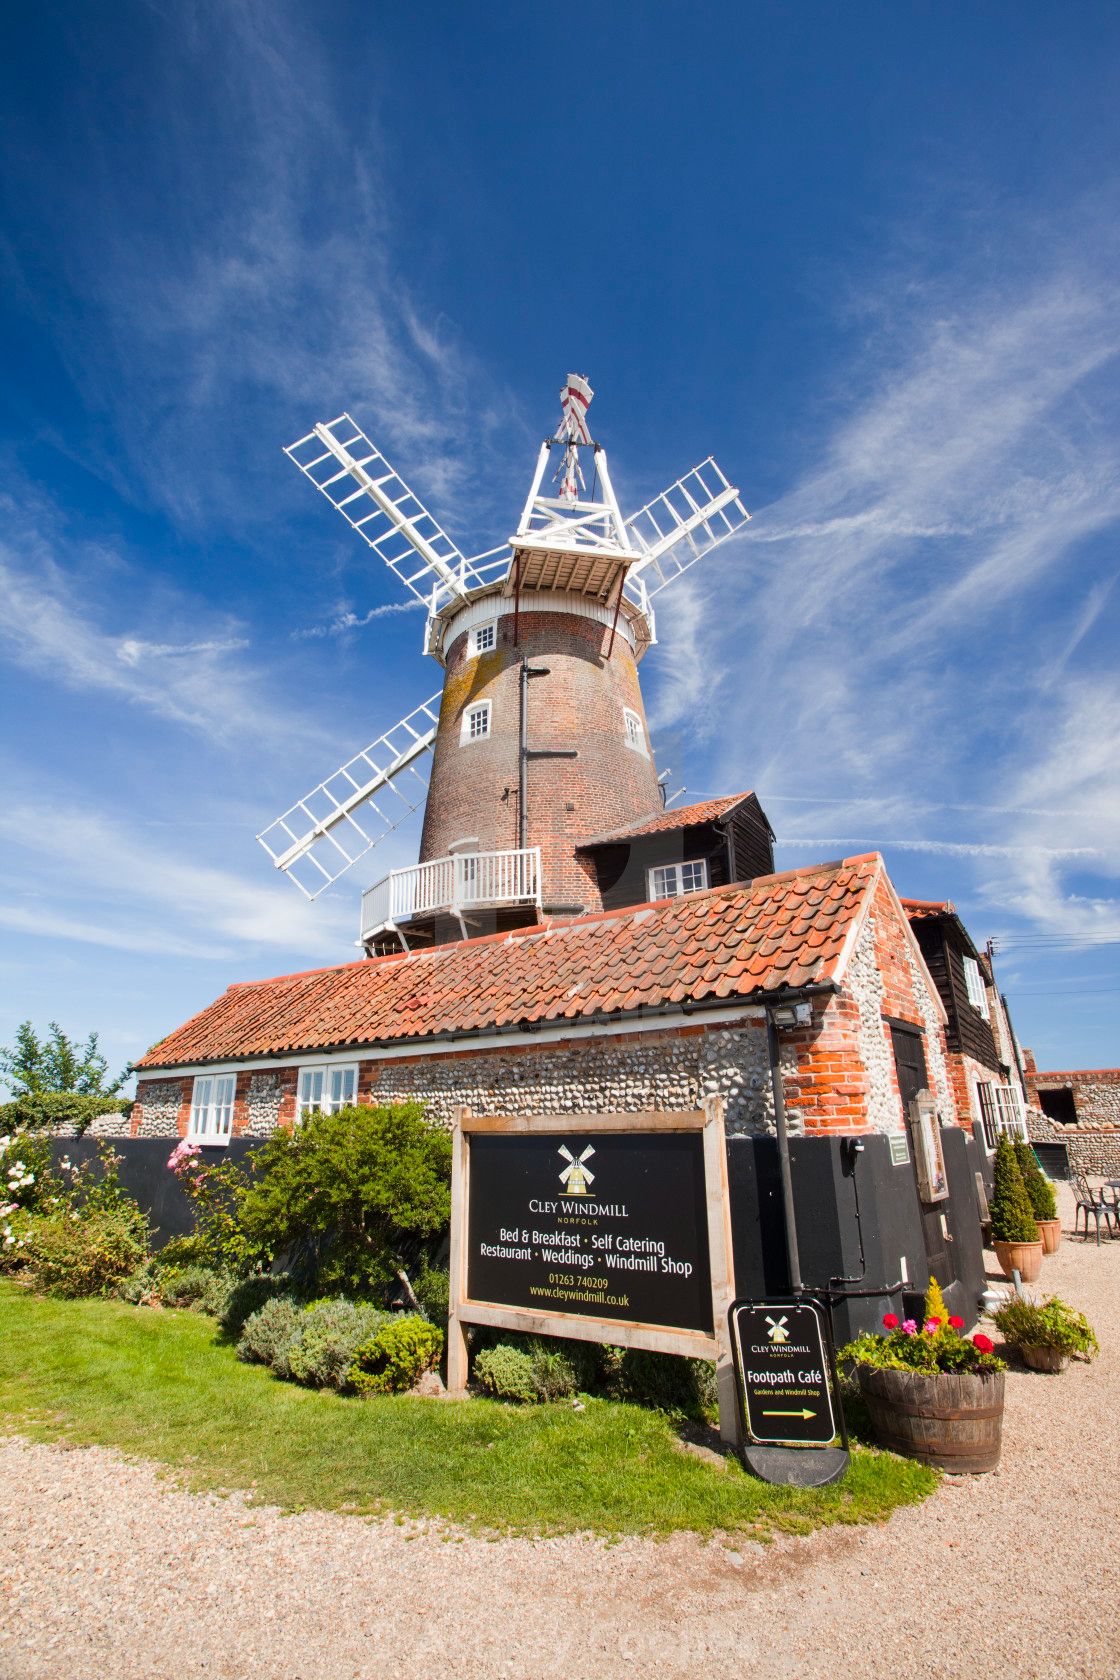 Gallery Item 7 for Cley Windmill